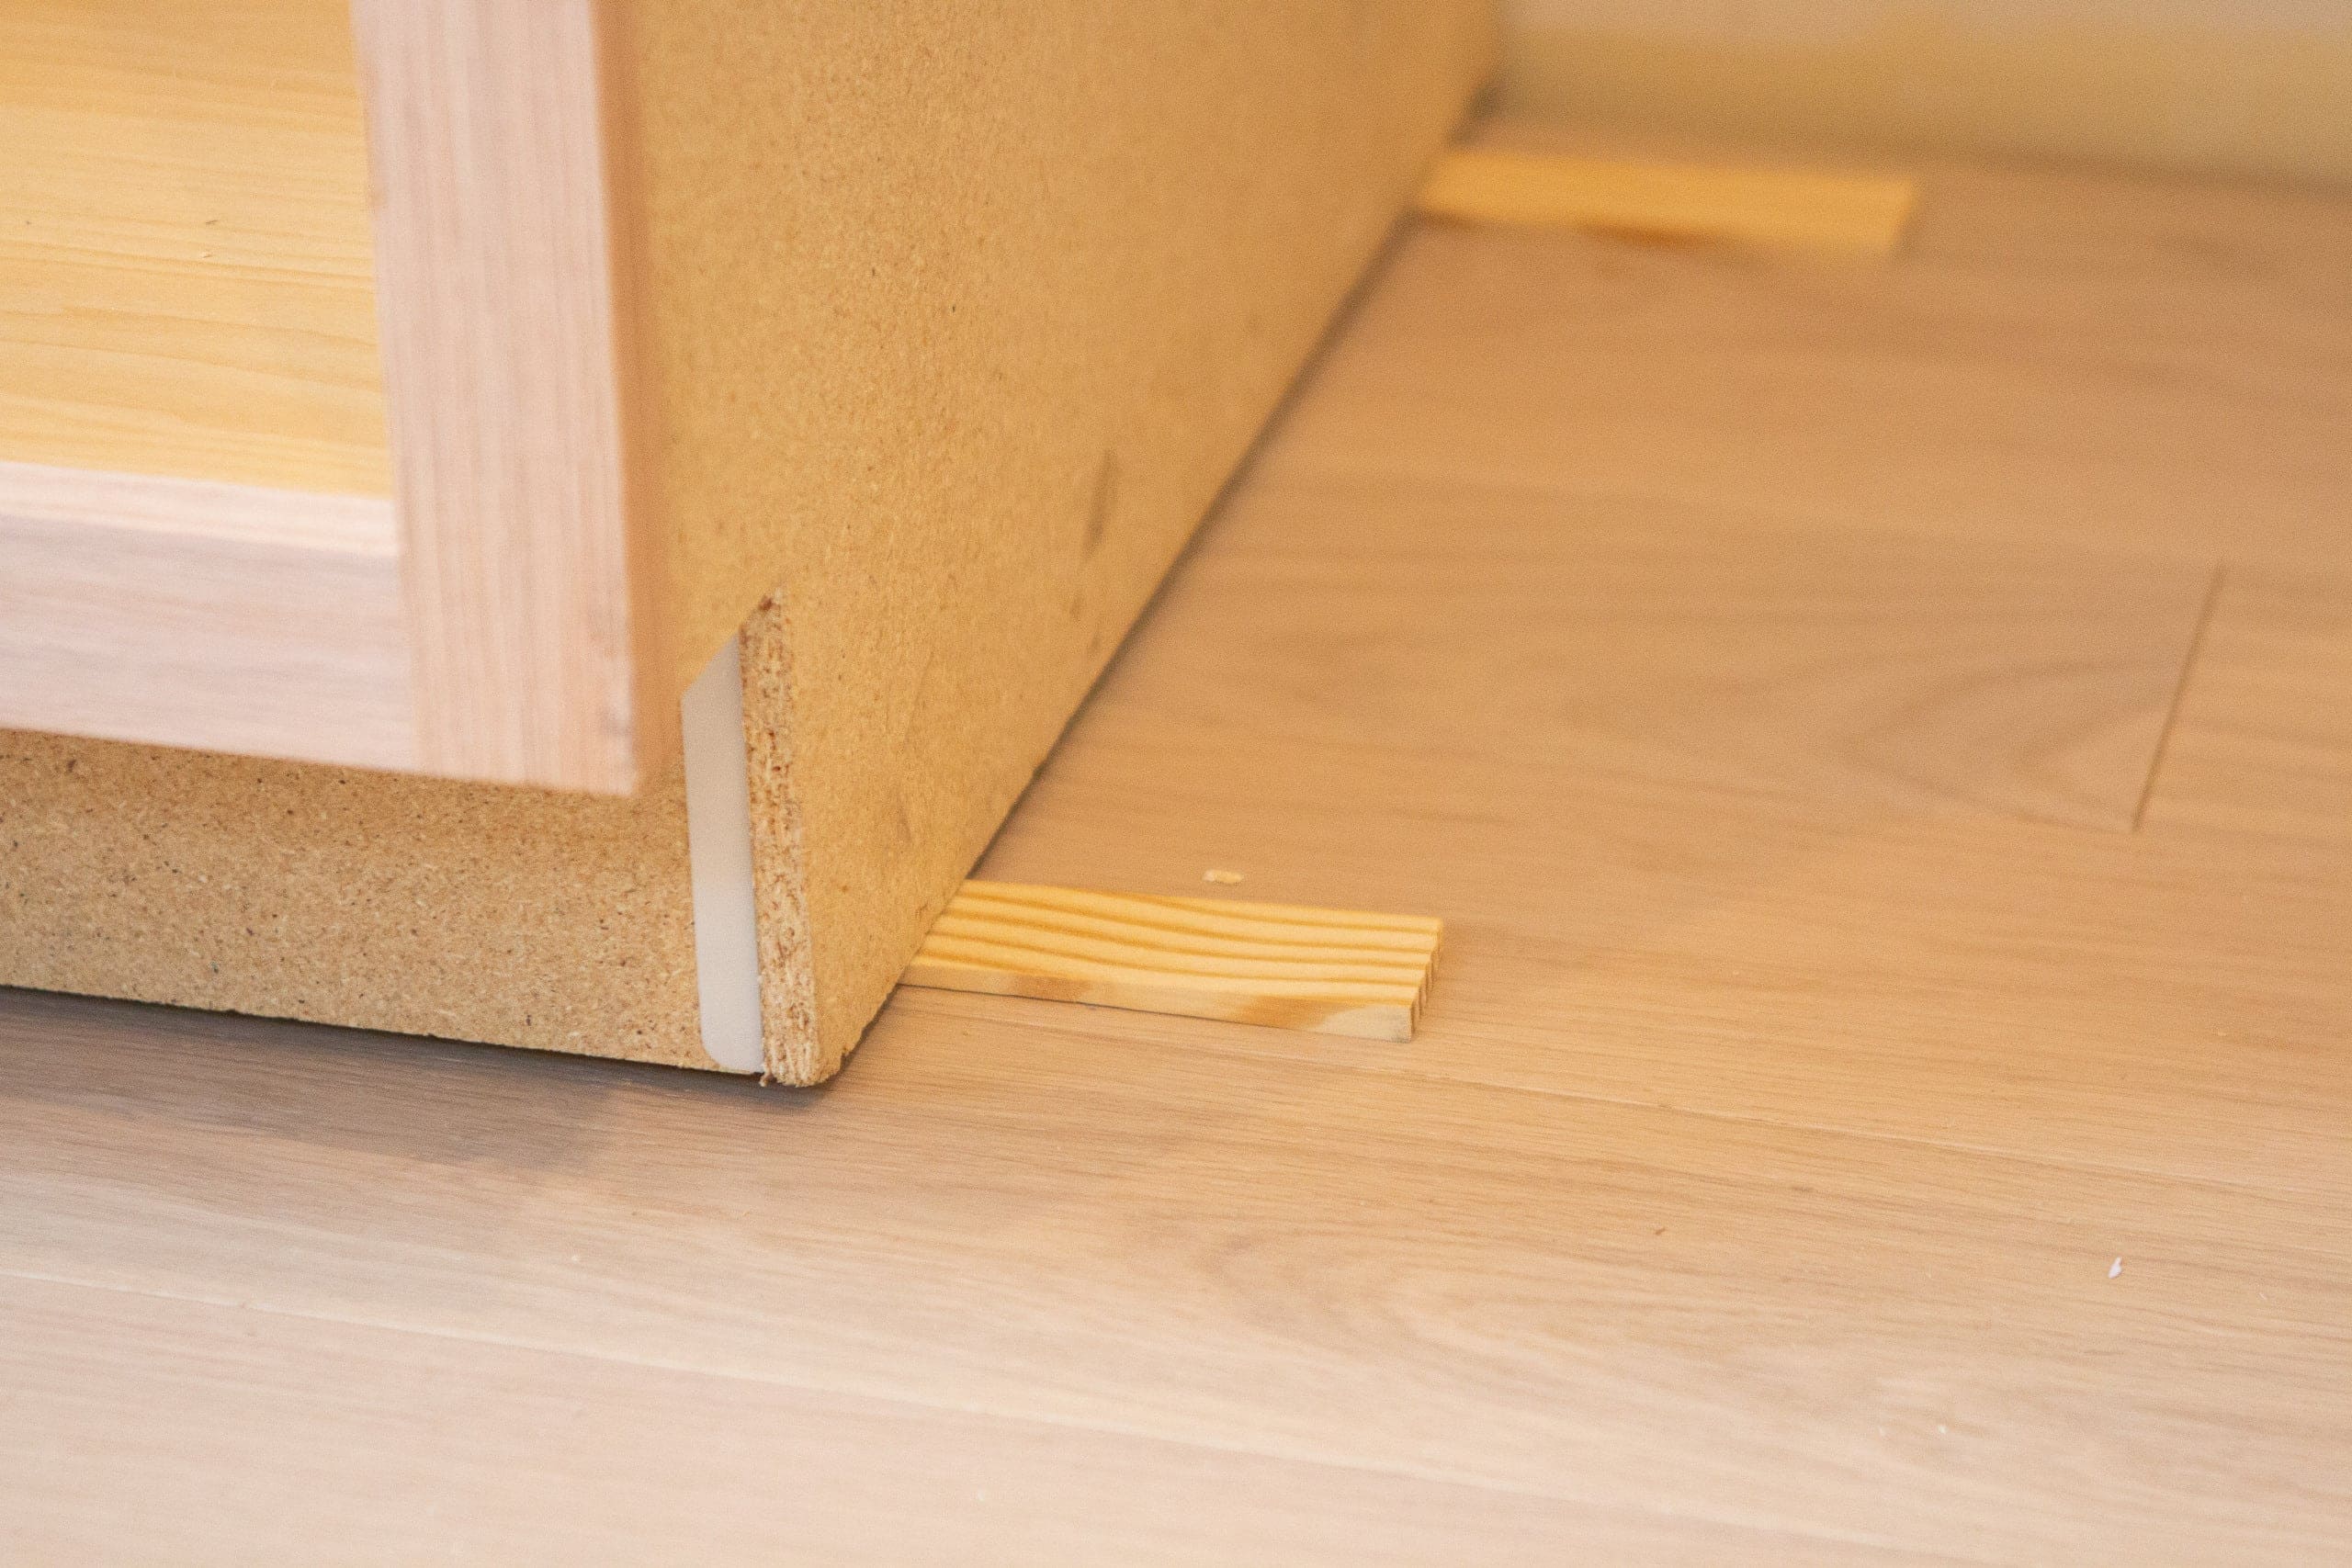 Use wood shims when installing DIY built-in cabinets